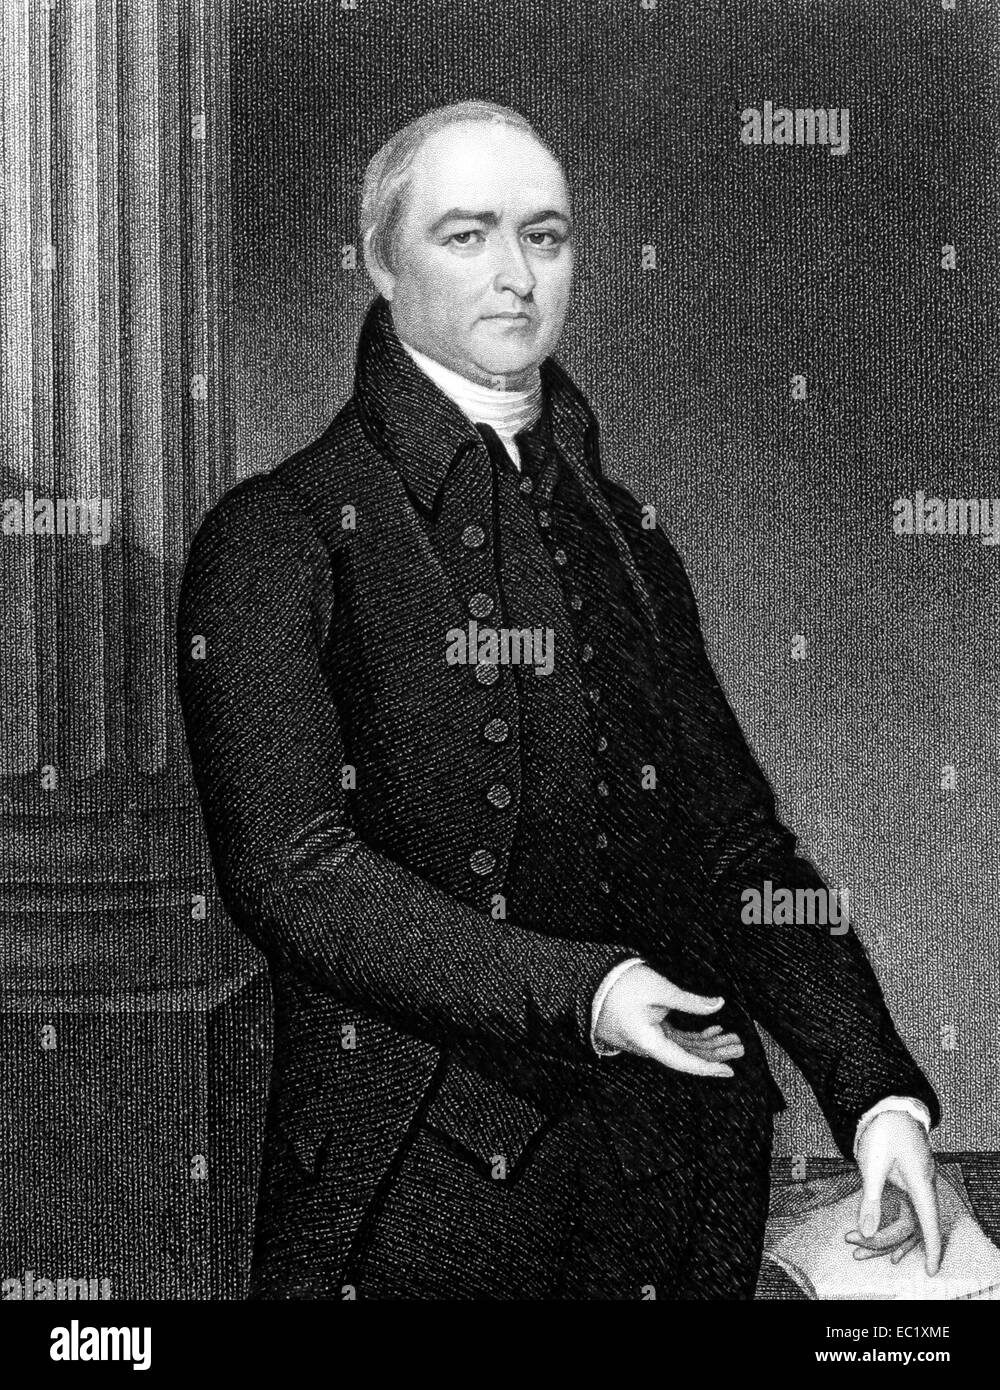 Timothy Dwight IV (1752-1817) on engraving from 1834. American academic and educator. Stock Photo